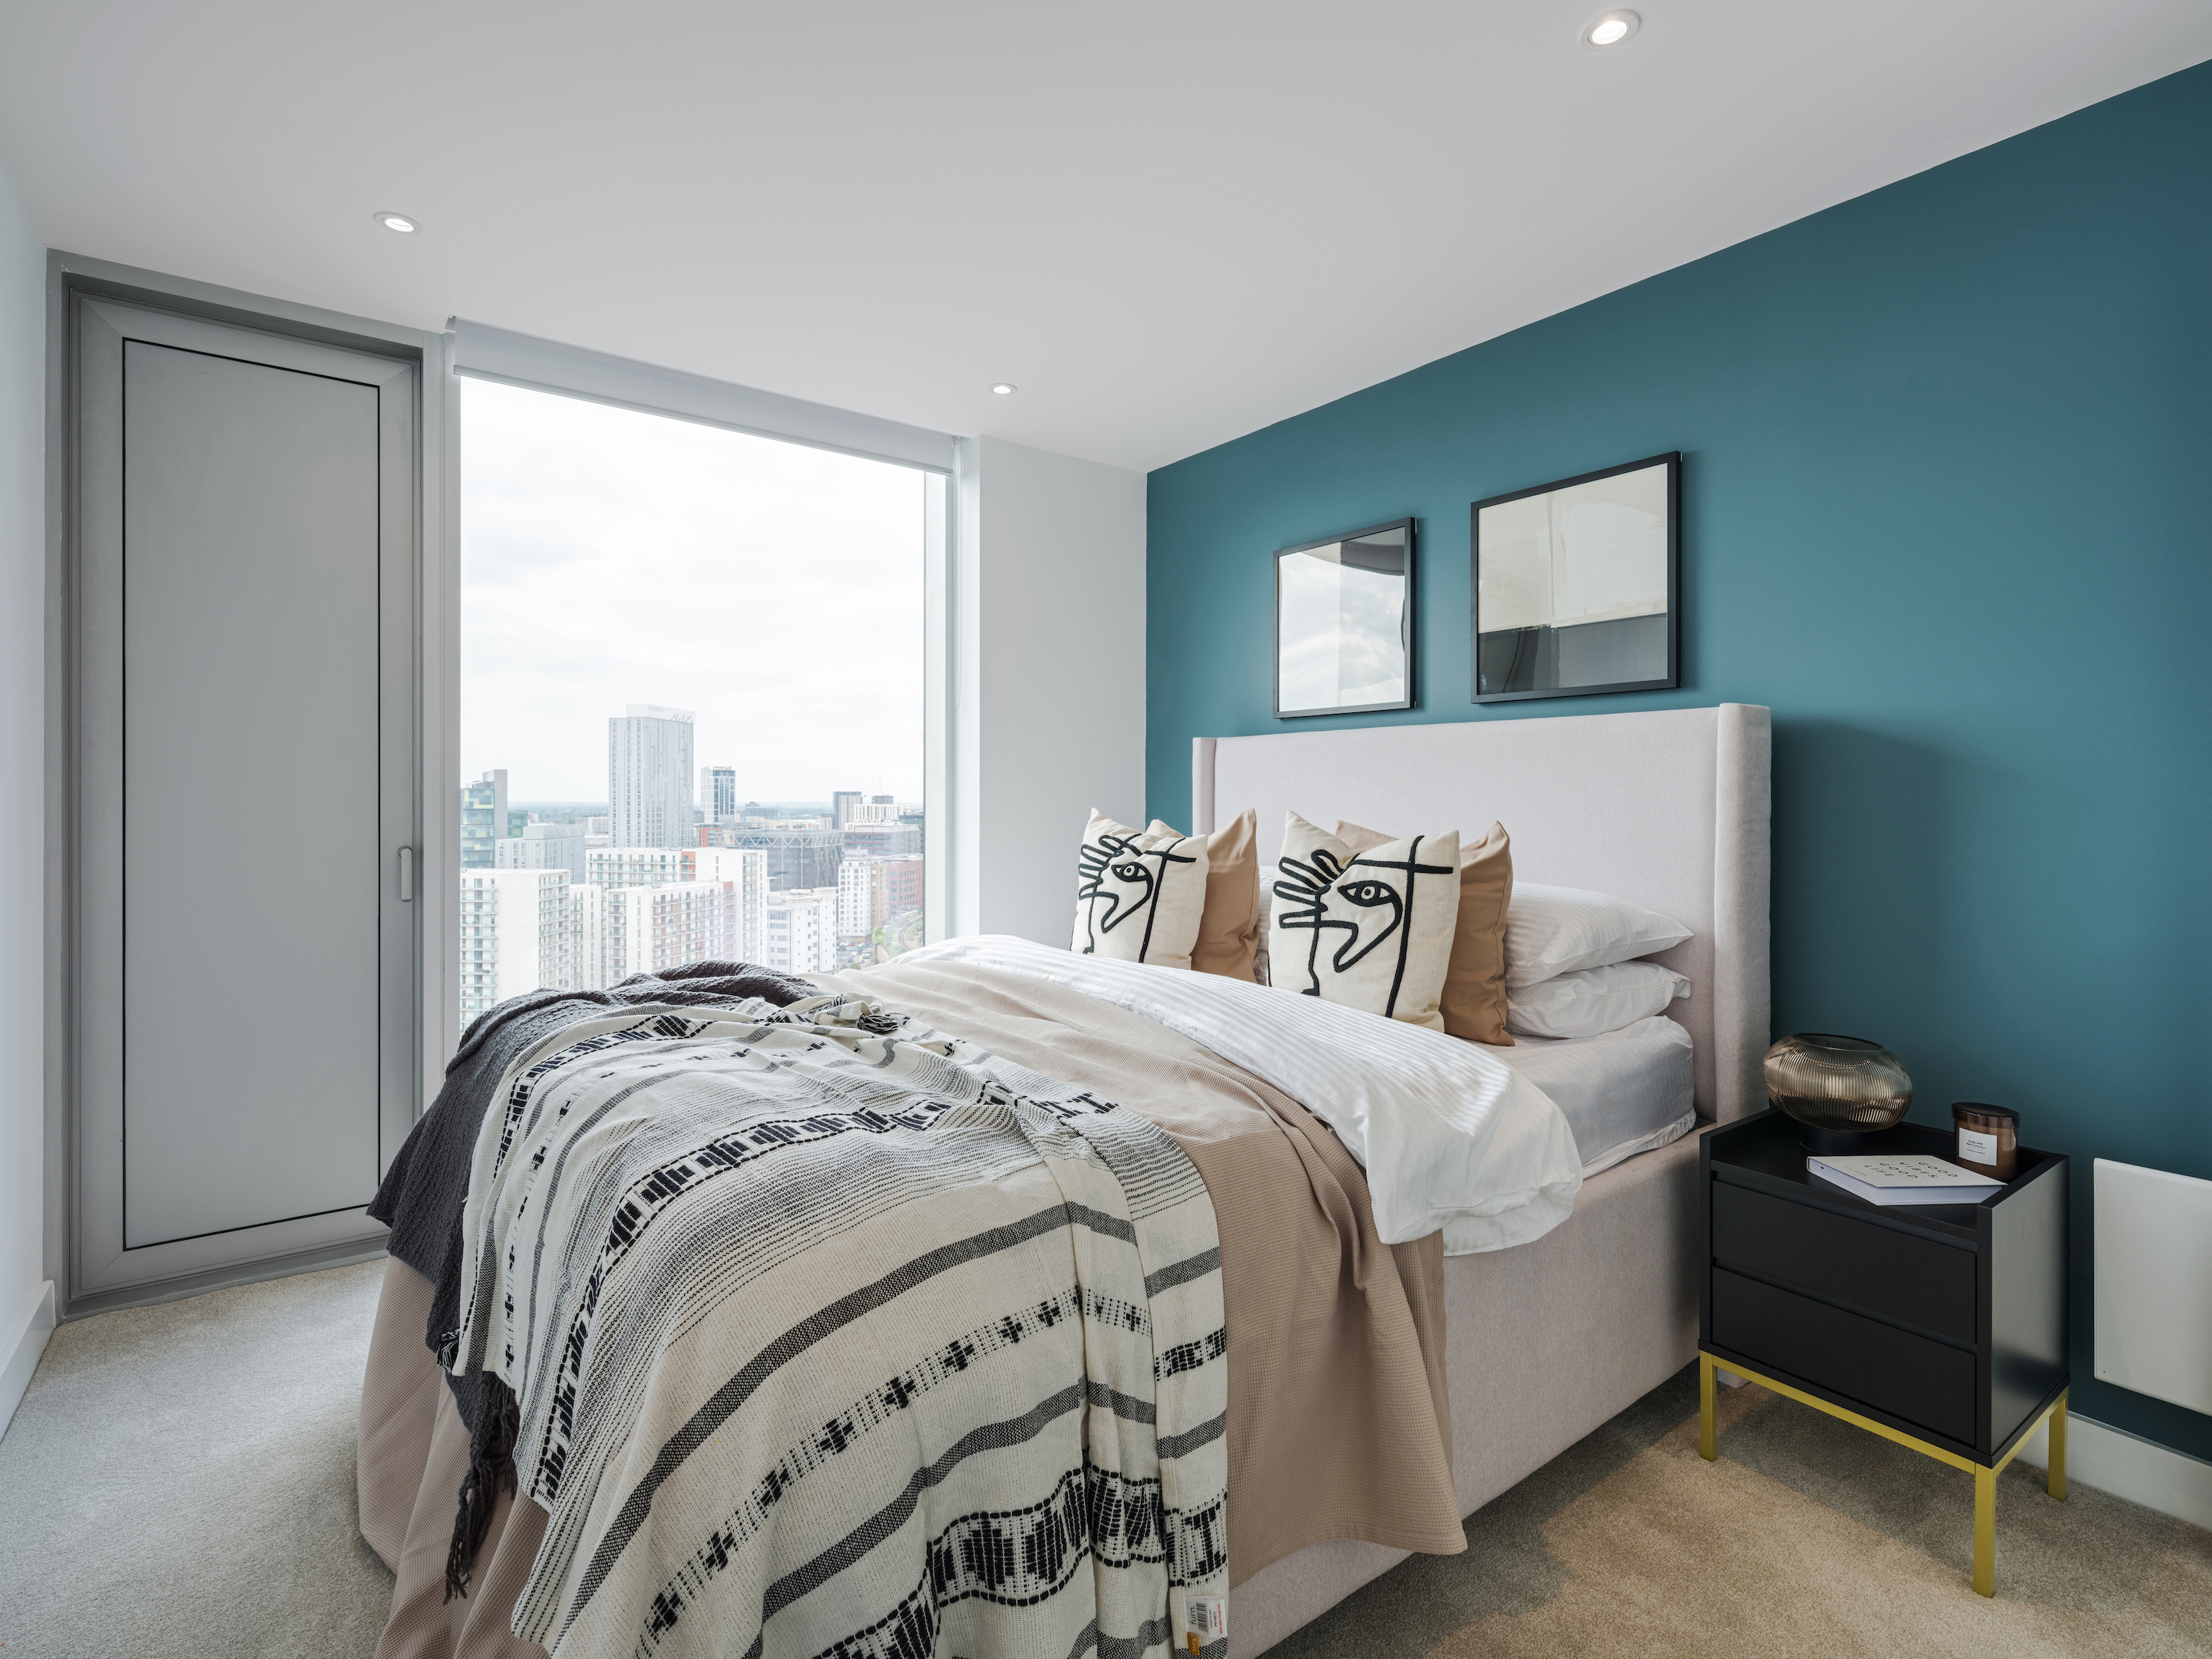 Apartments to Rent by Cortland in Cortland at Colliers Yard, Salford, M3, bedroom